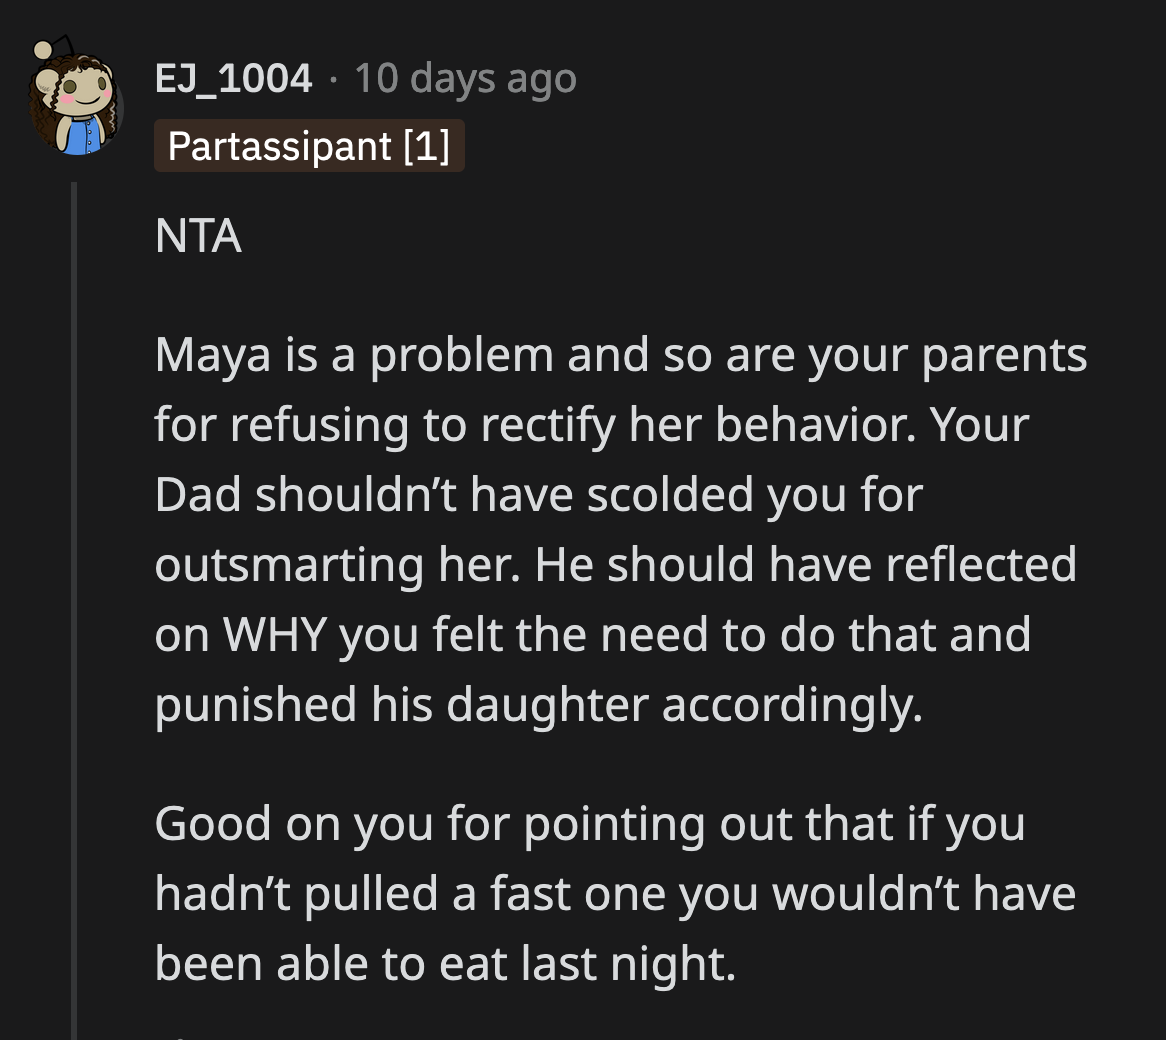 Their parents should stop enabling their daughter's childish treatment of OP.